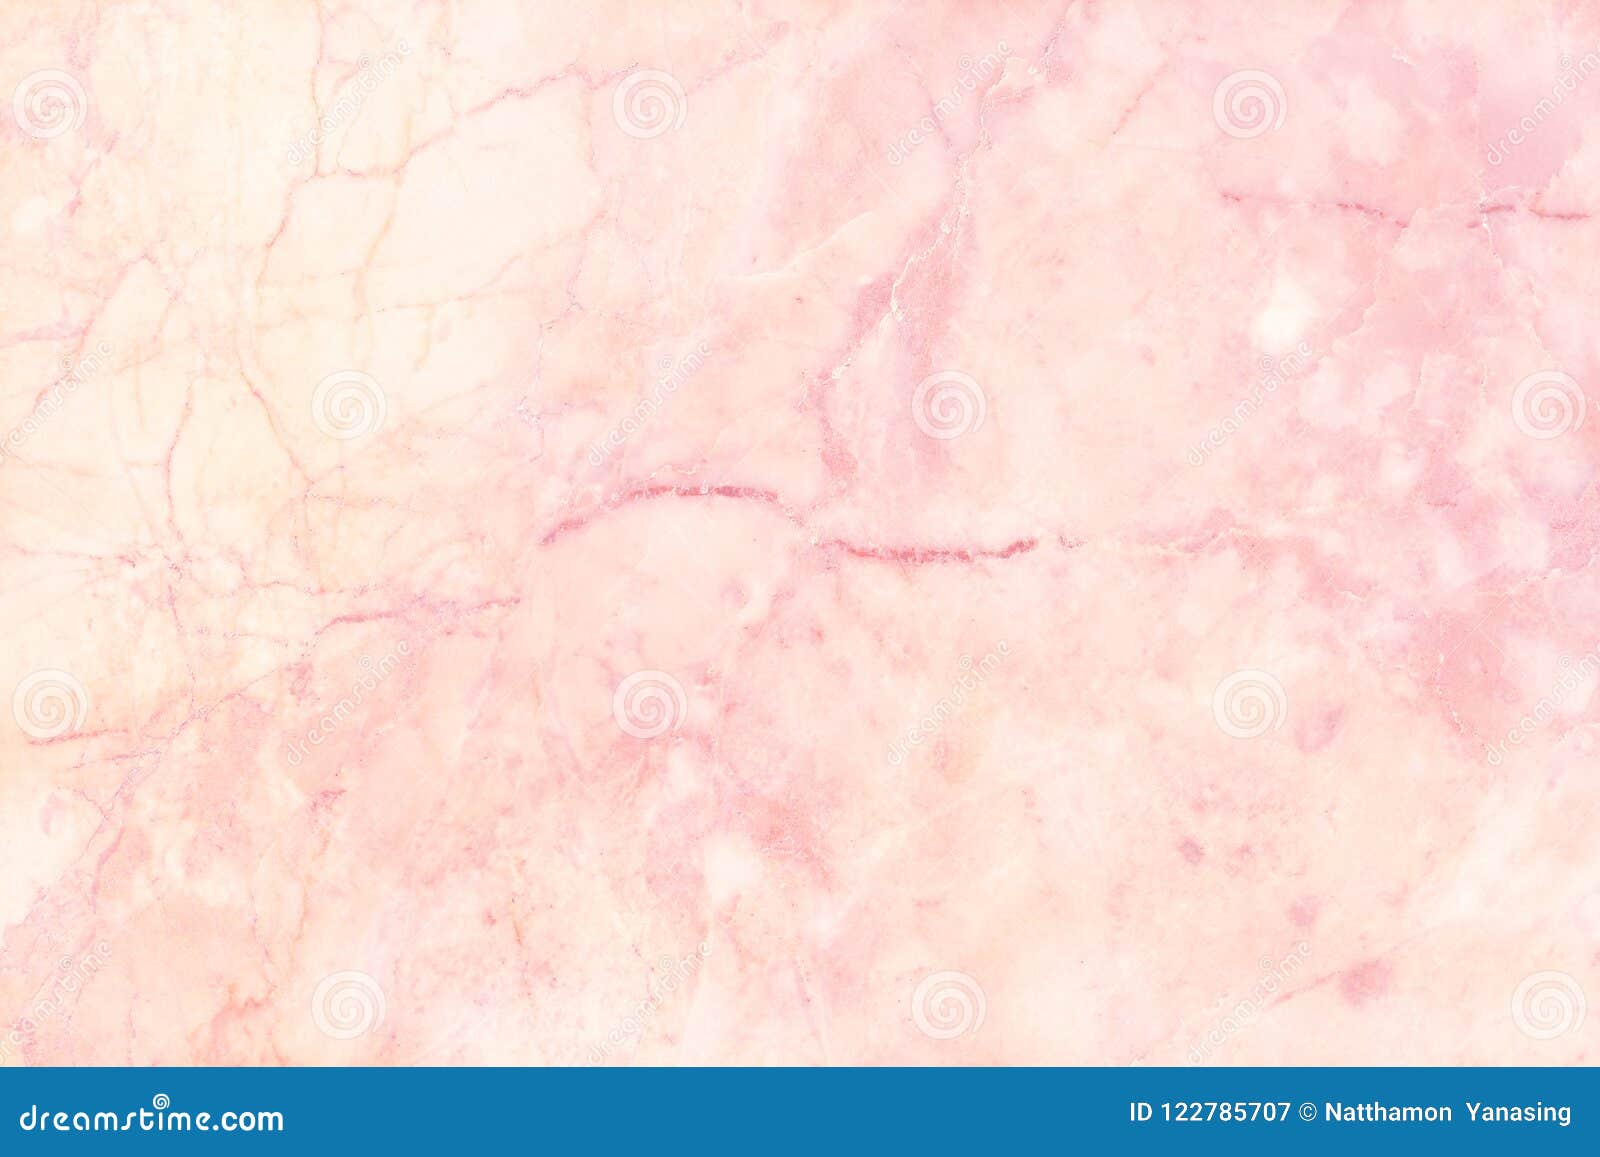 Download Rose Gold Marble Texture Background With Detailed ...